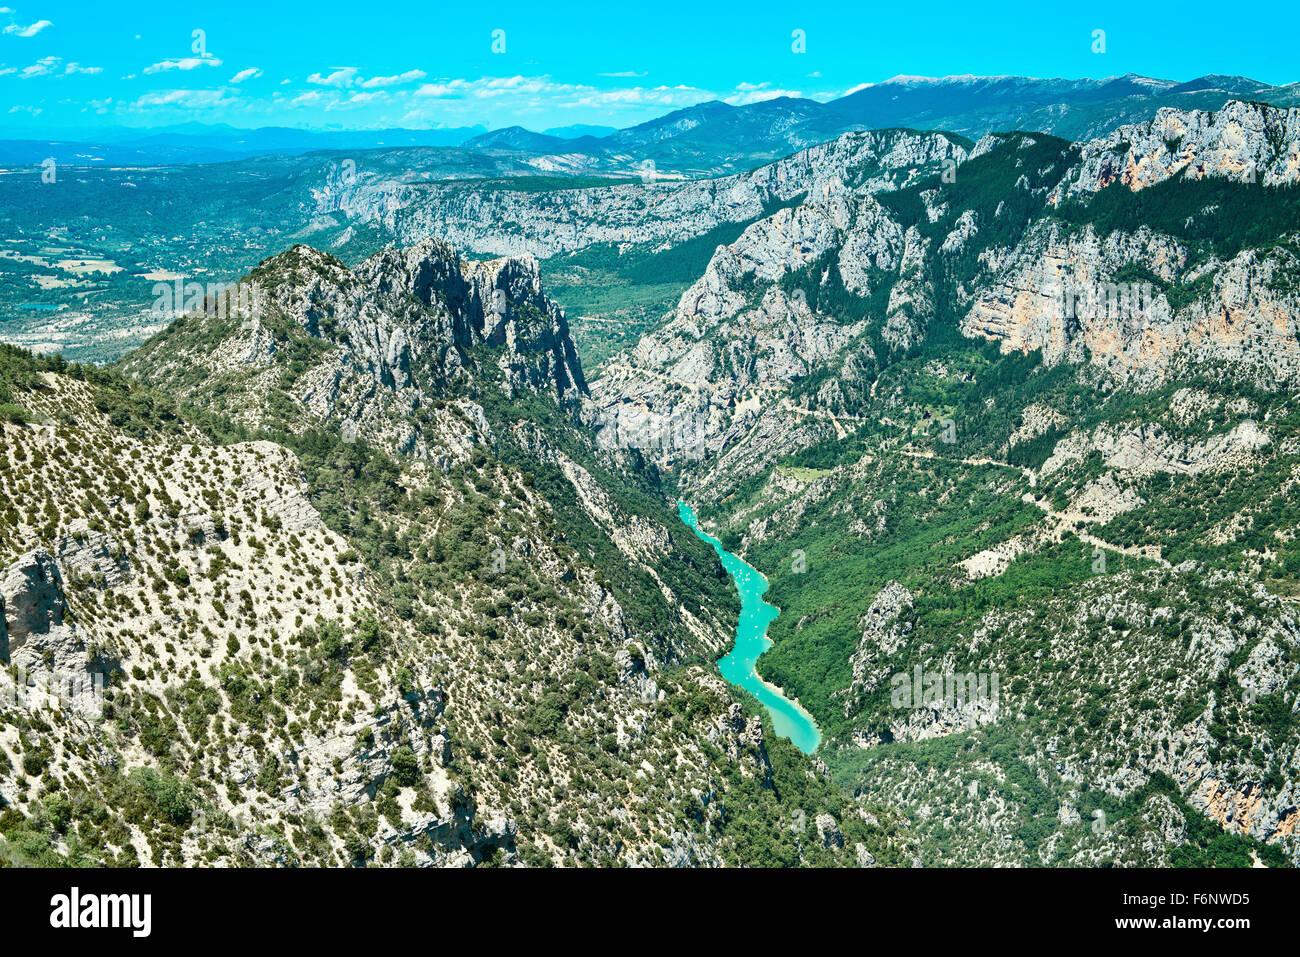 Gorges du Verdon european canyon and river aerial view. Alps, Provence, France. Stock Photo